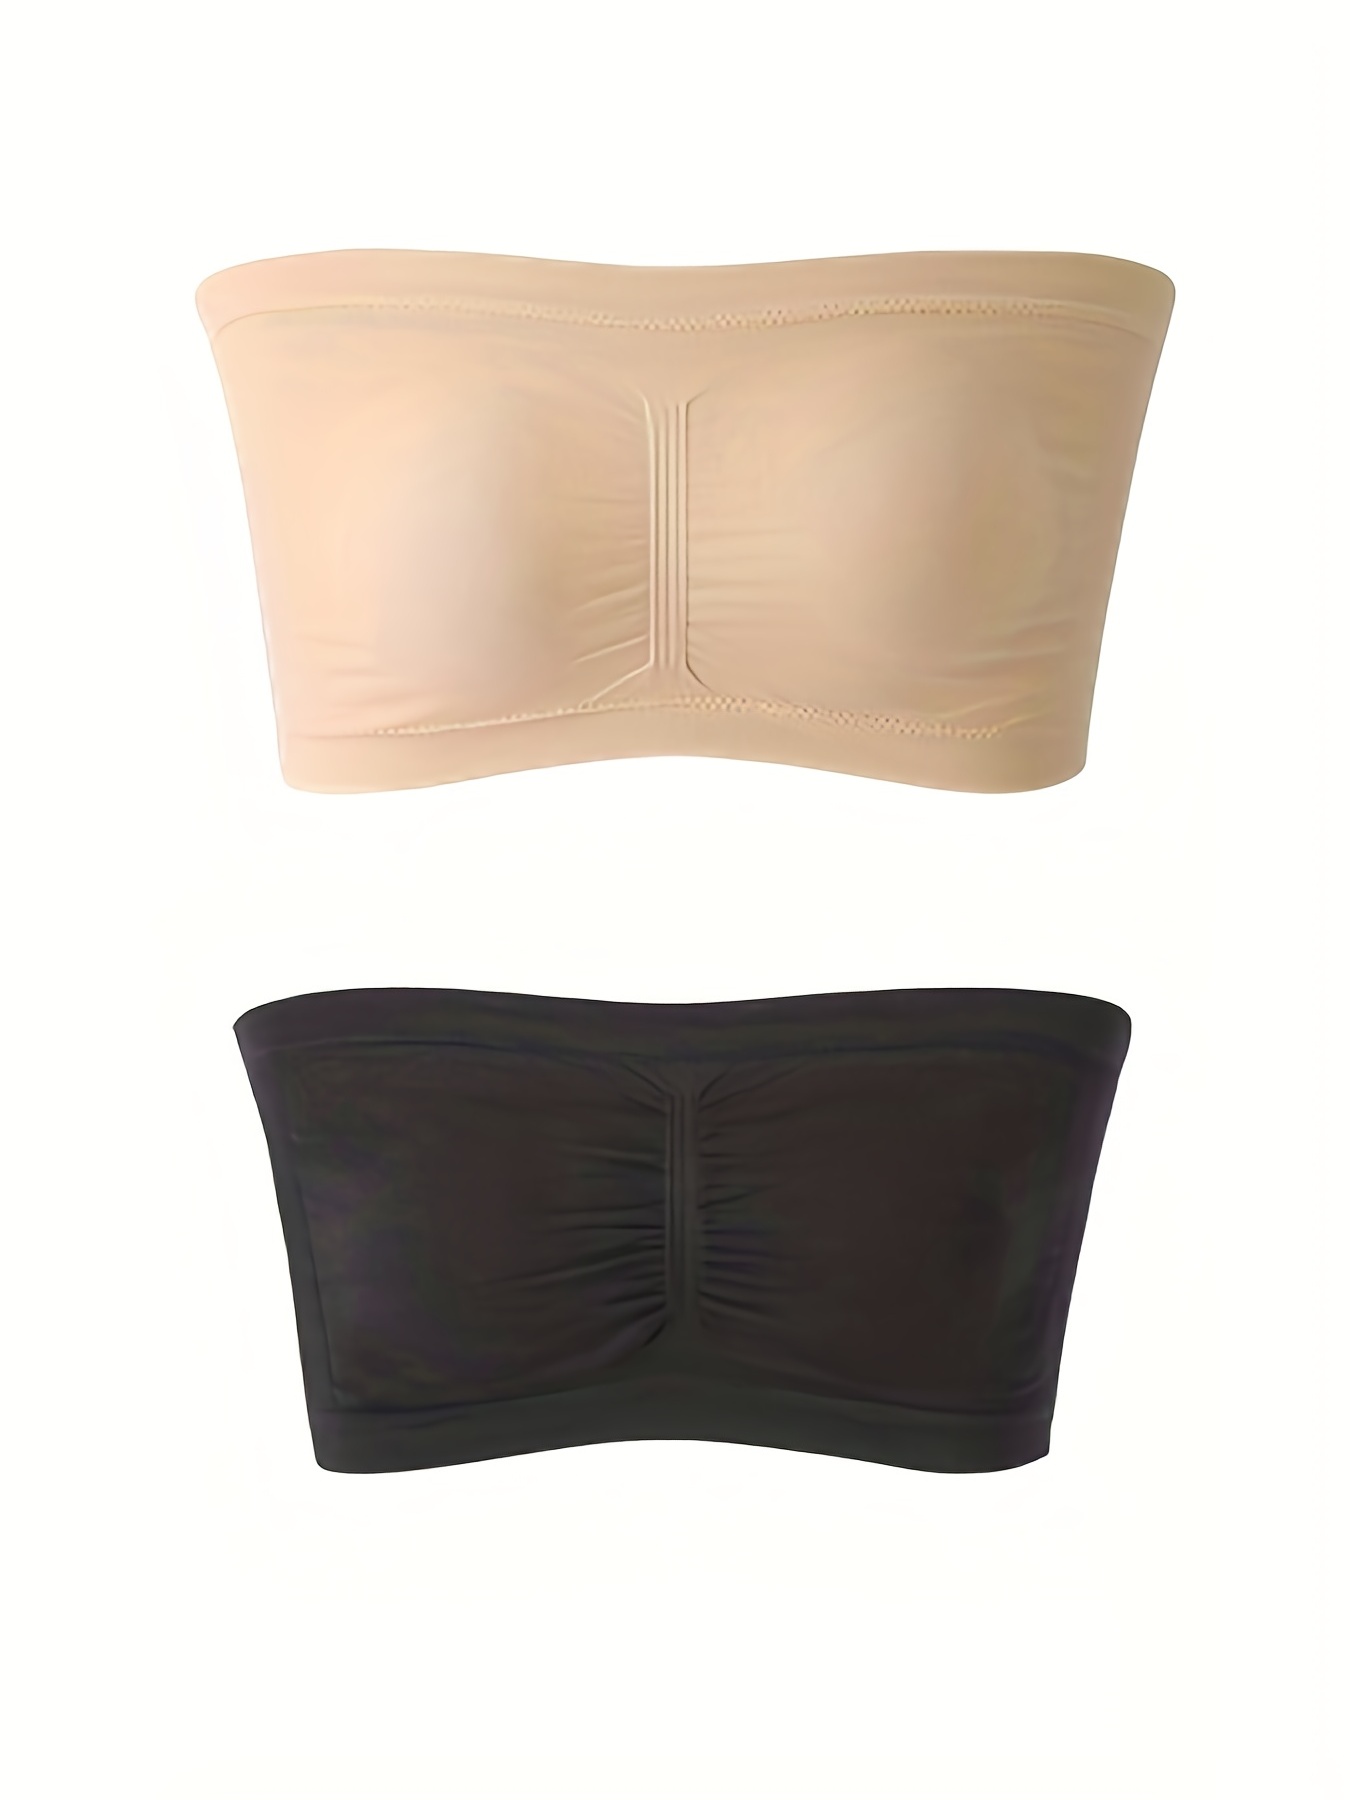 Tube Top Dress Womens Padded Bandeau Bra Wire Free Strapless Convertible  Bralettes Basic Layer Tube Top Bra Full Sleeve Mesh Top 